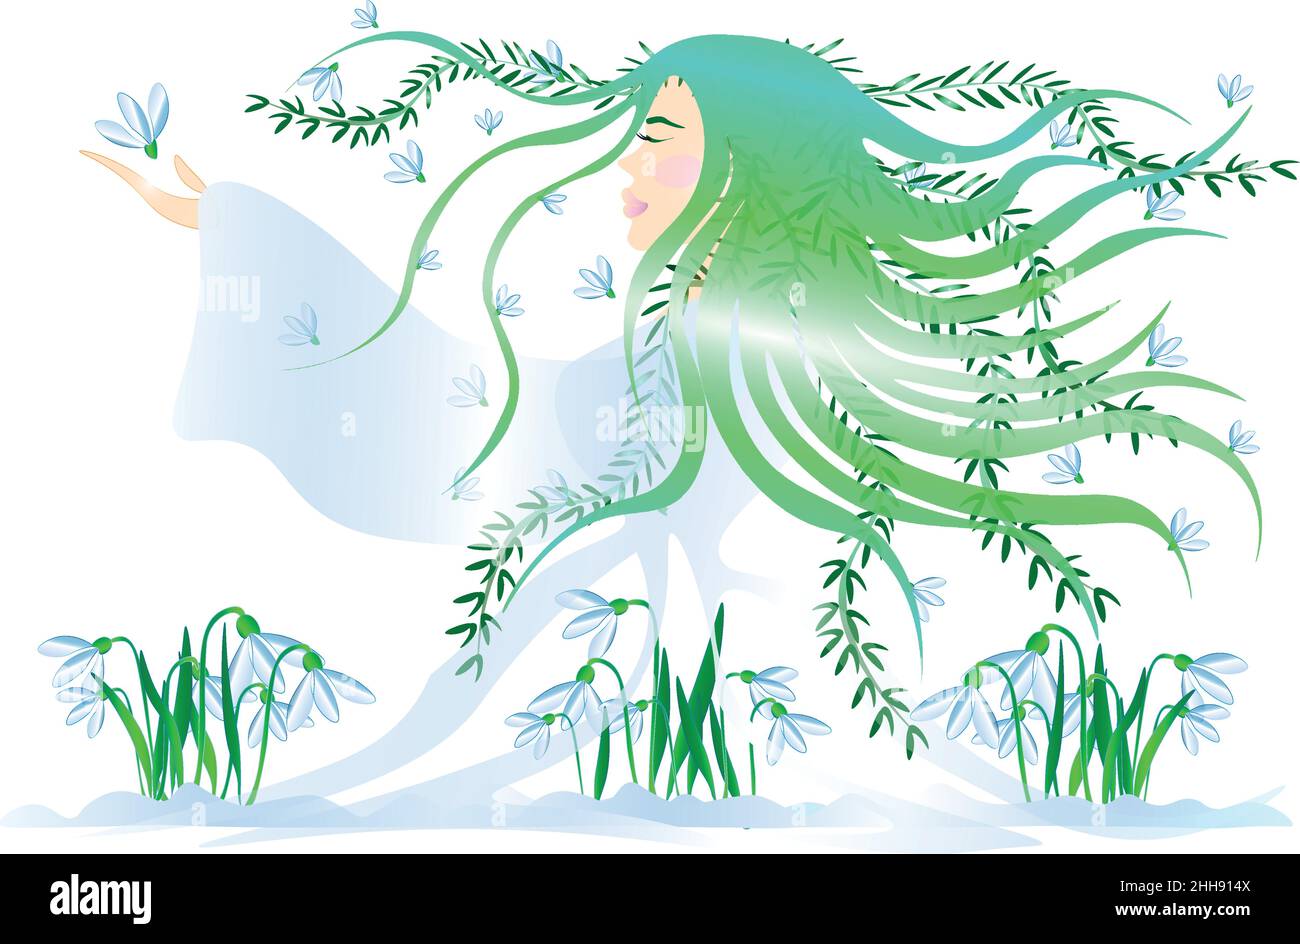 Vector illustration of the Goddess of Spring. Snowdrops have blossomed, spring has come. Maiden of Spring awakens nature Stock Vector